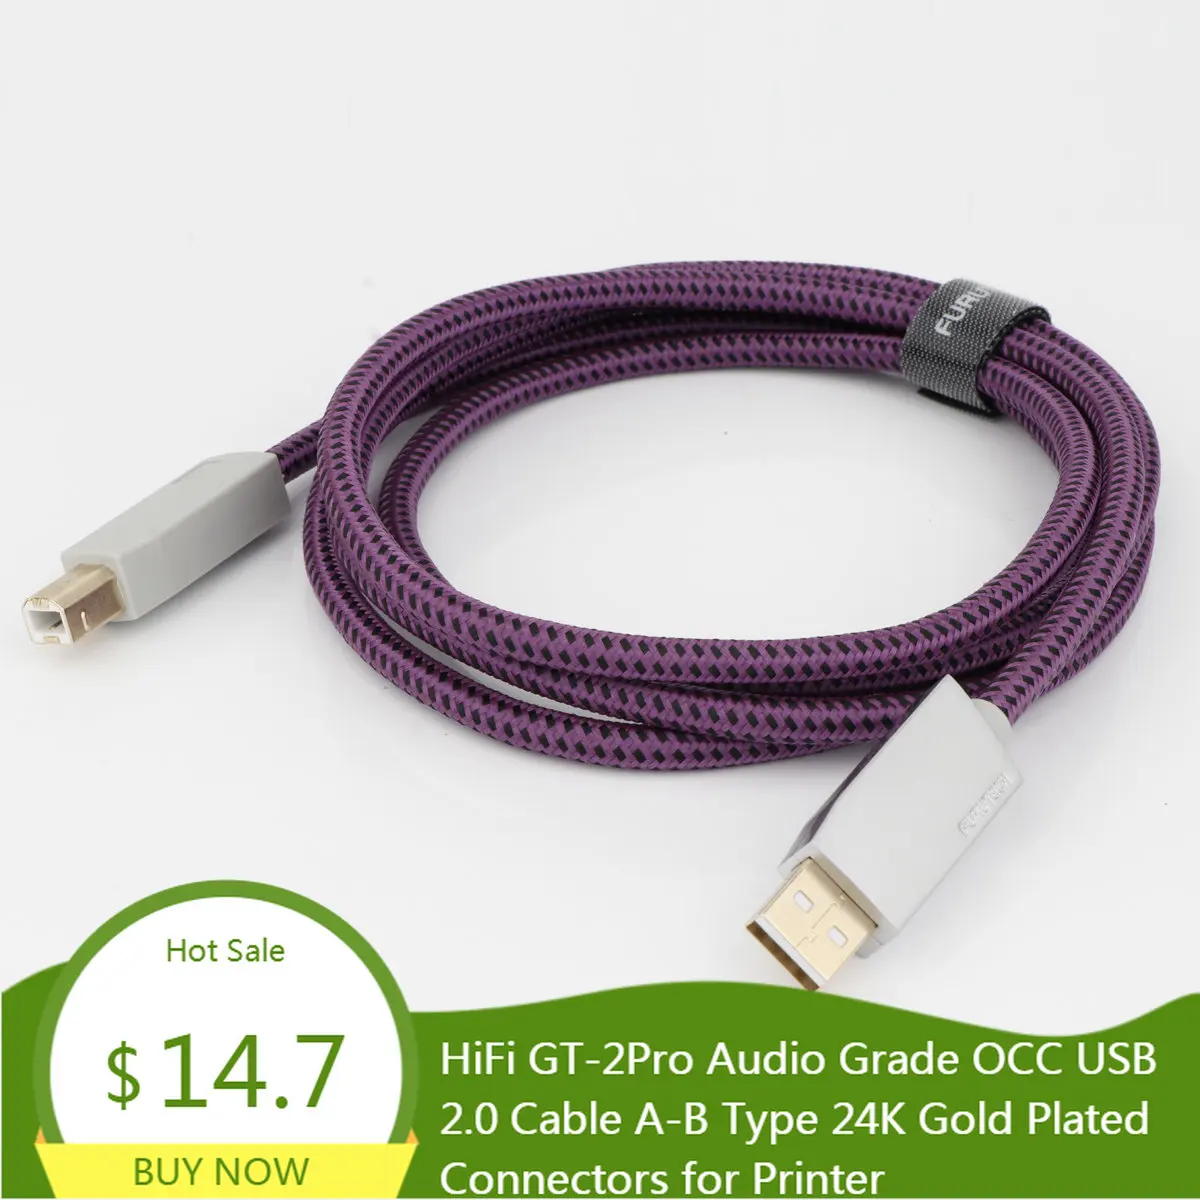 

HiFi GT-2Pro Audio Grade OCC USB 2.0 Cable A-B Type 24K Gold Plated Connectors for Printer